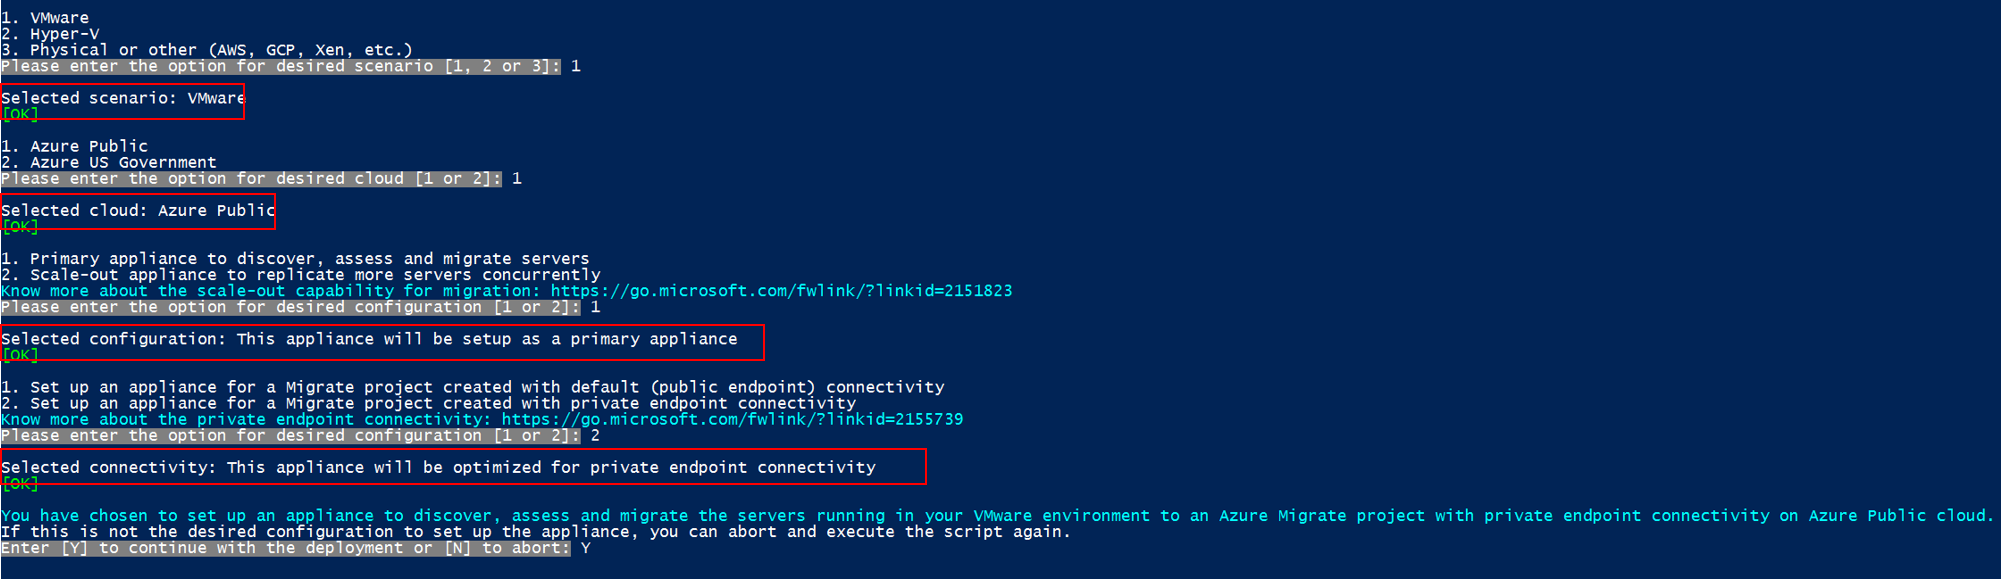 Screenshot that shows how to set up appliance with desired configuration for private endpoint.